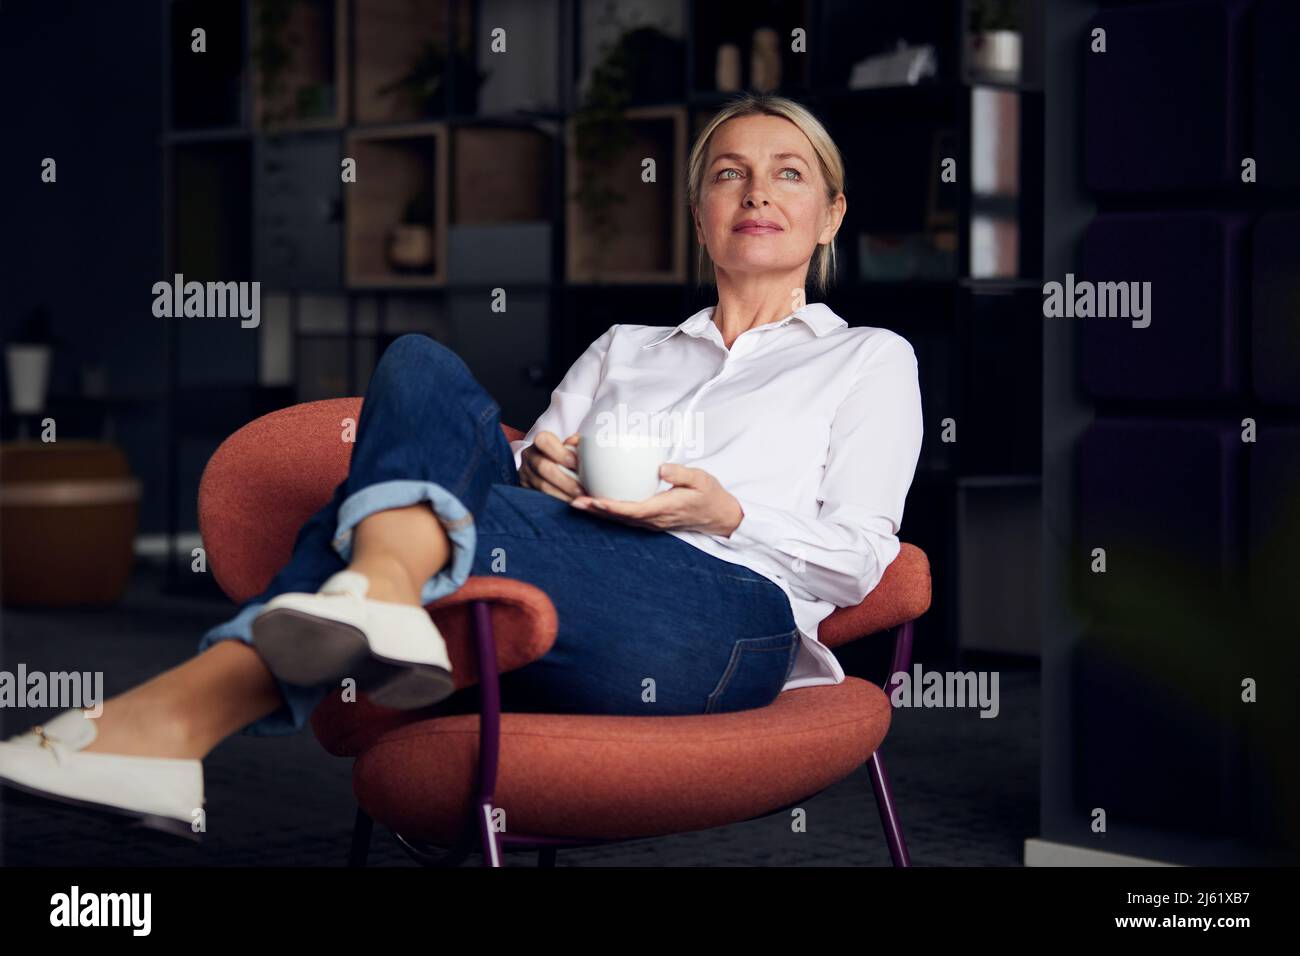 Businesswoman holding coffee cup sitting with legs crossed at knee on chair Stock Photo